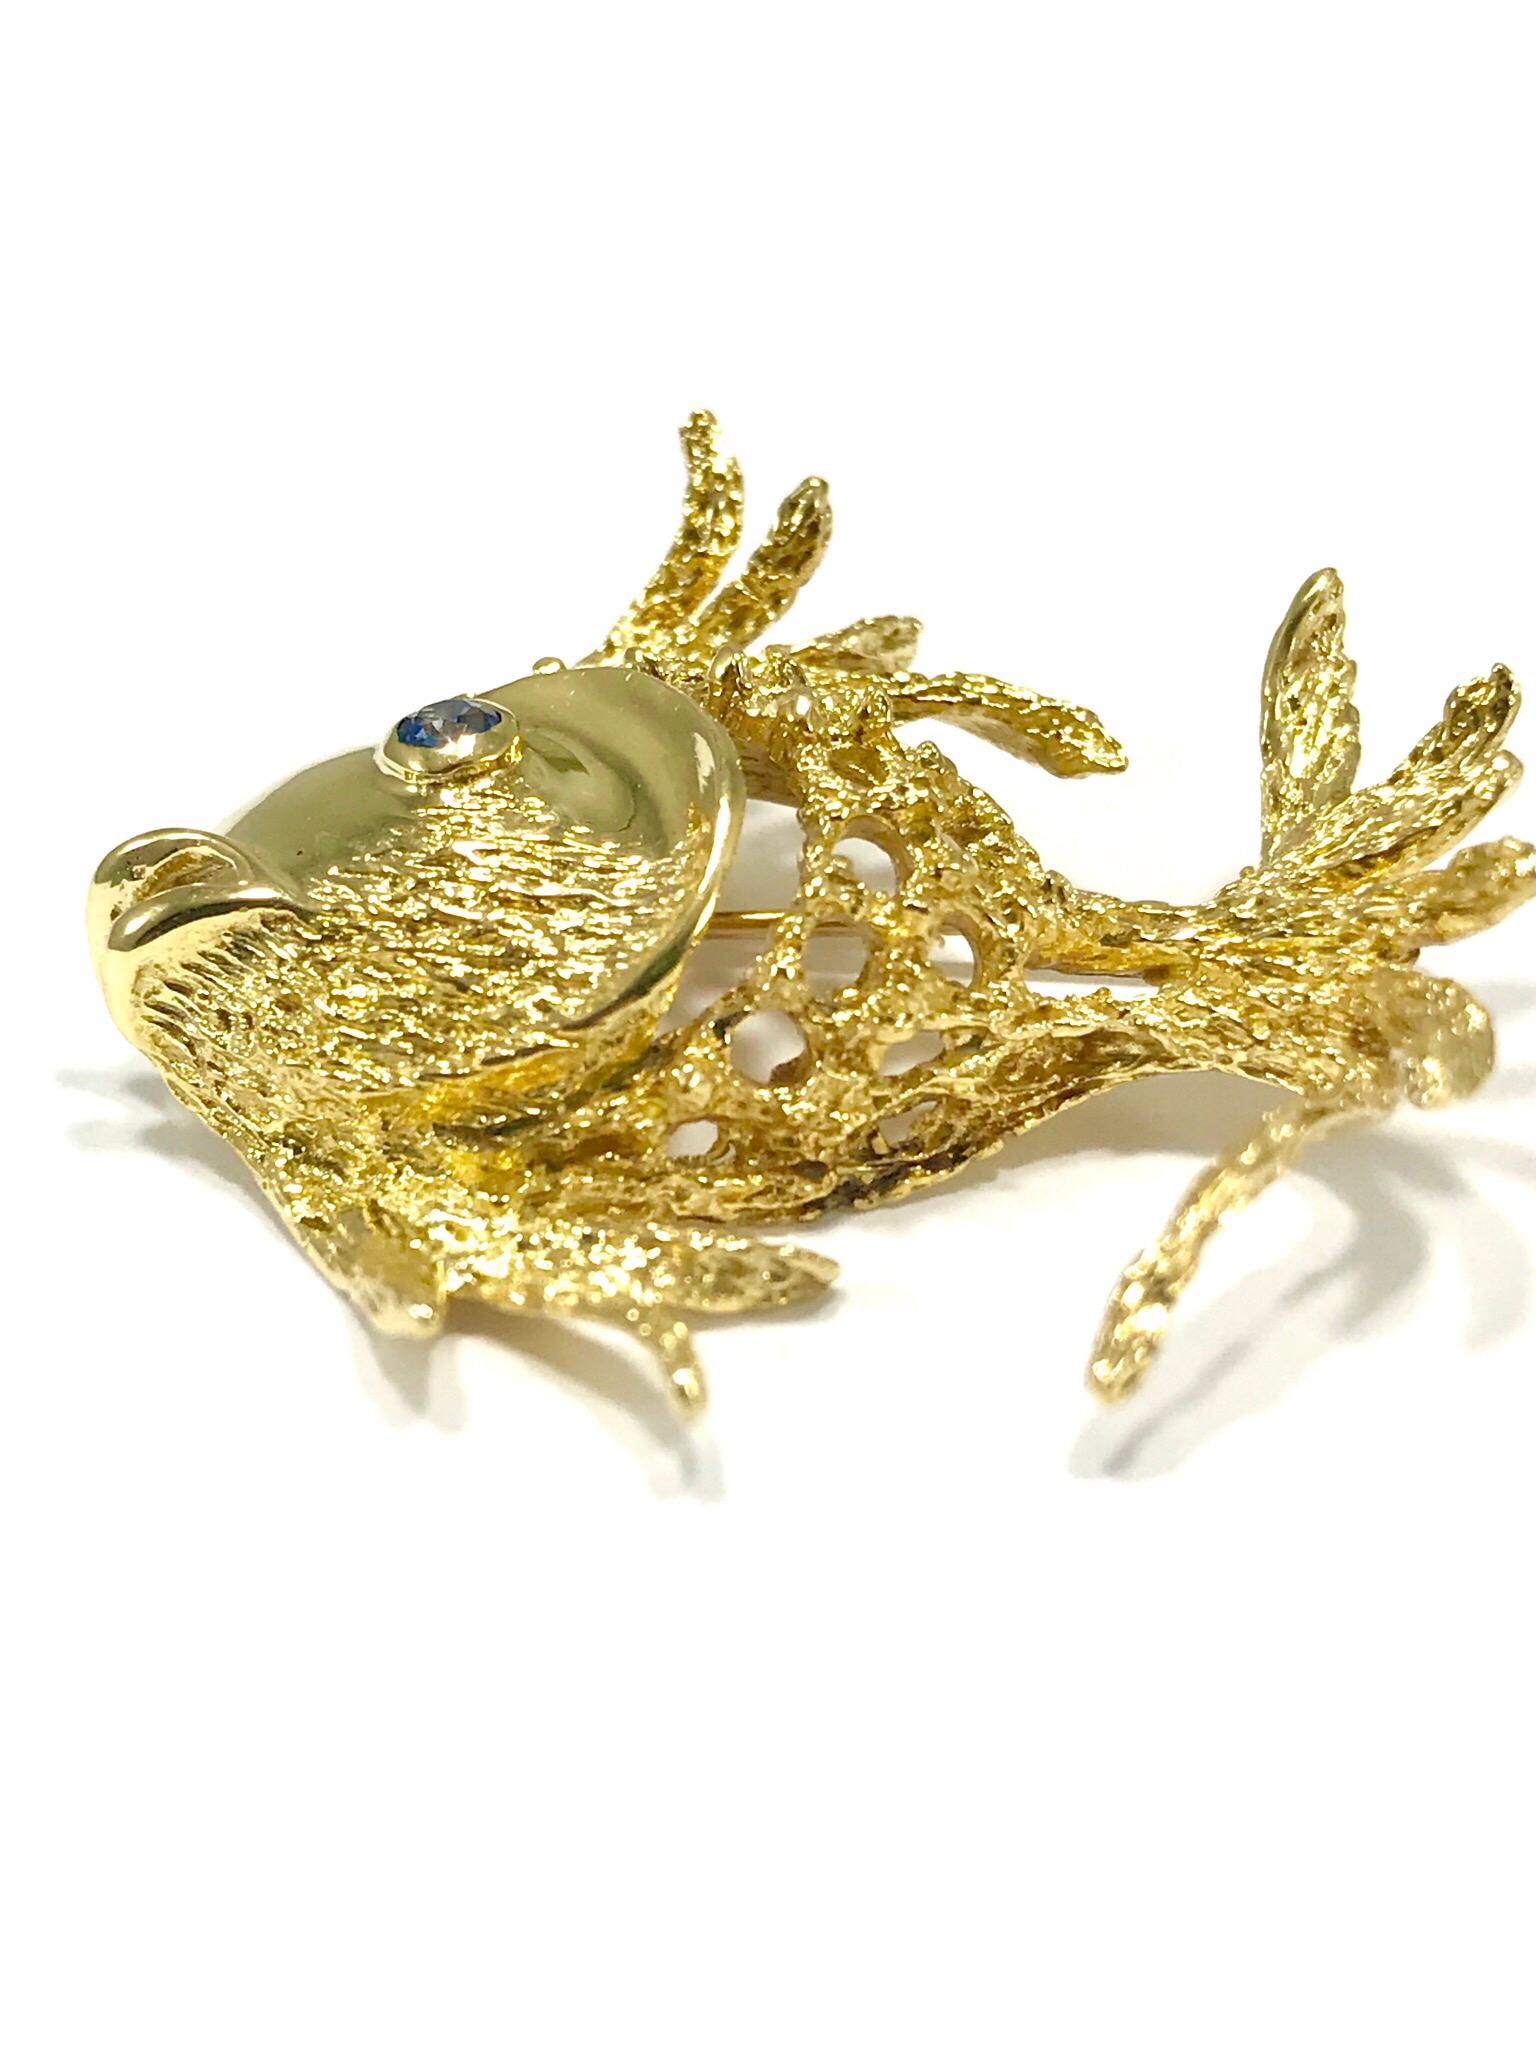 This is a whimsical 18 karat yellow gold angel fish brooch, with a single sapphire eye.  The sapphire is 0.15 carats, bezel set.  The fish body is made up of textured open work gold.  The pin features a a single pin closure.  The tail fin is stamped